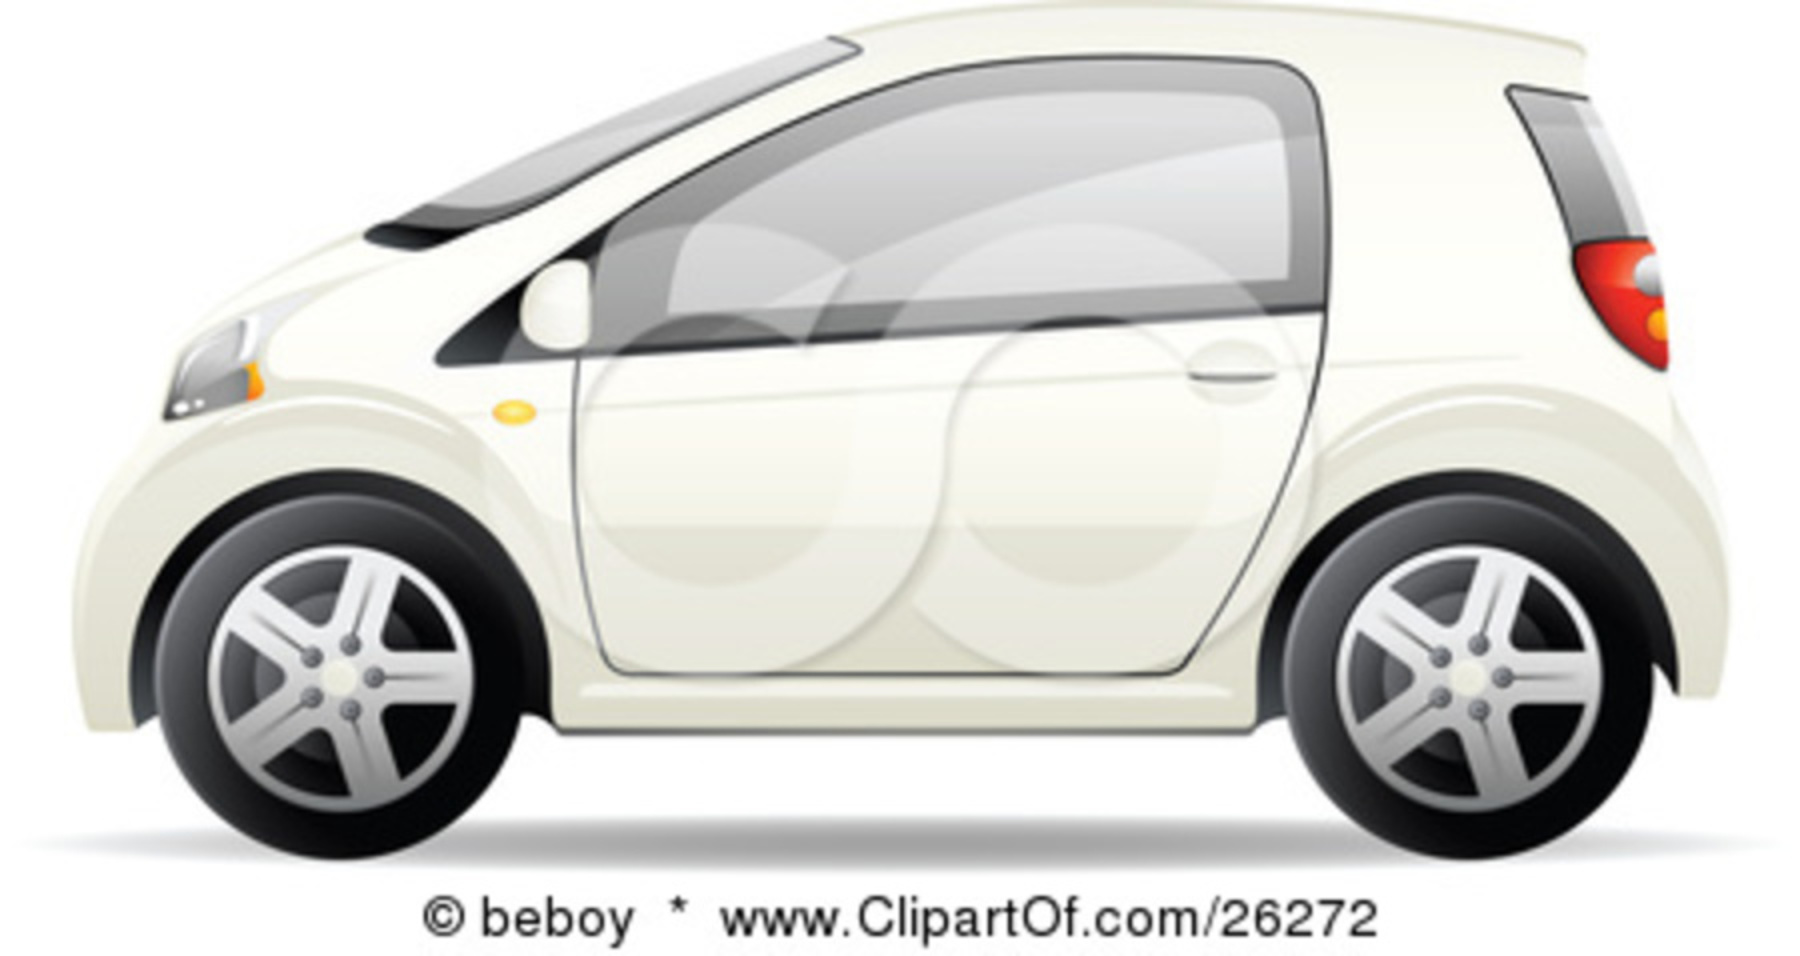 Clipart Illustration of a Cute Little White Compact Car Resembling a Yaris,